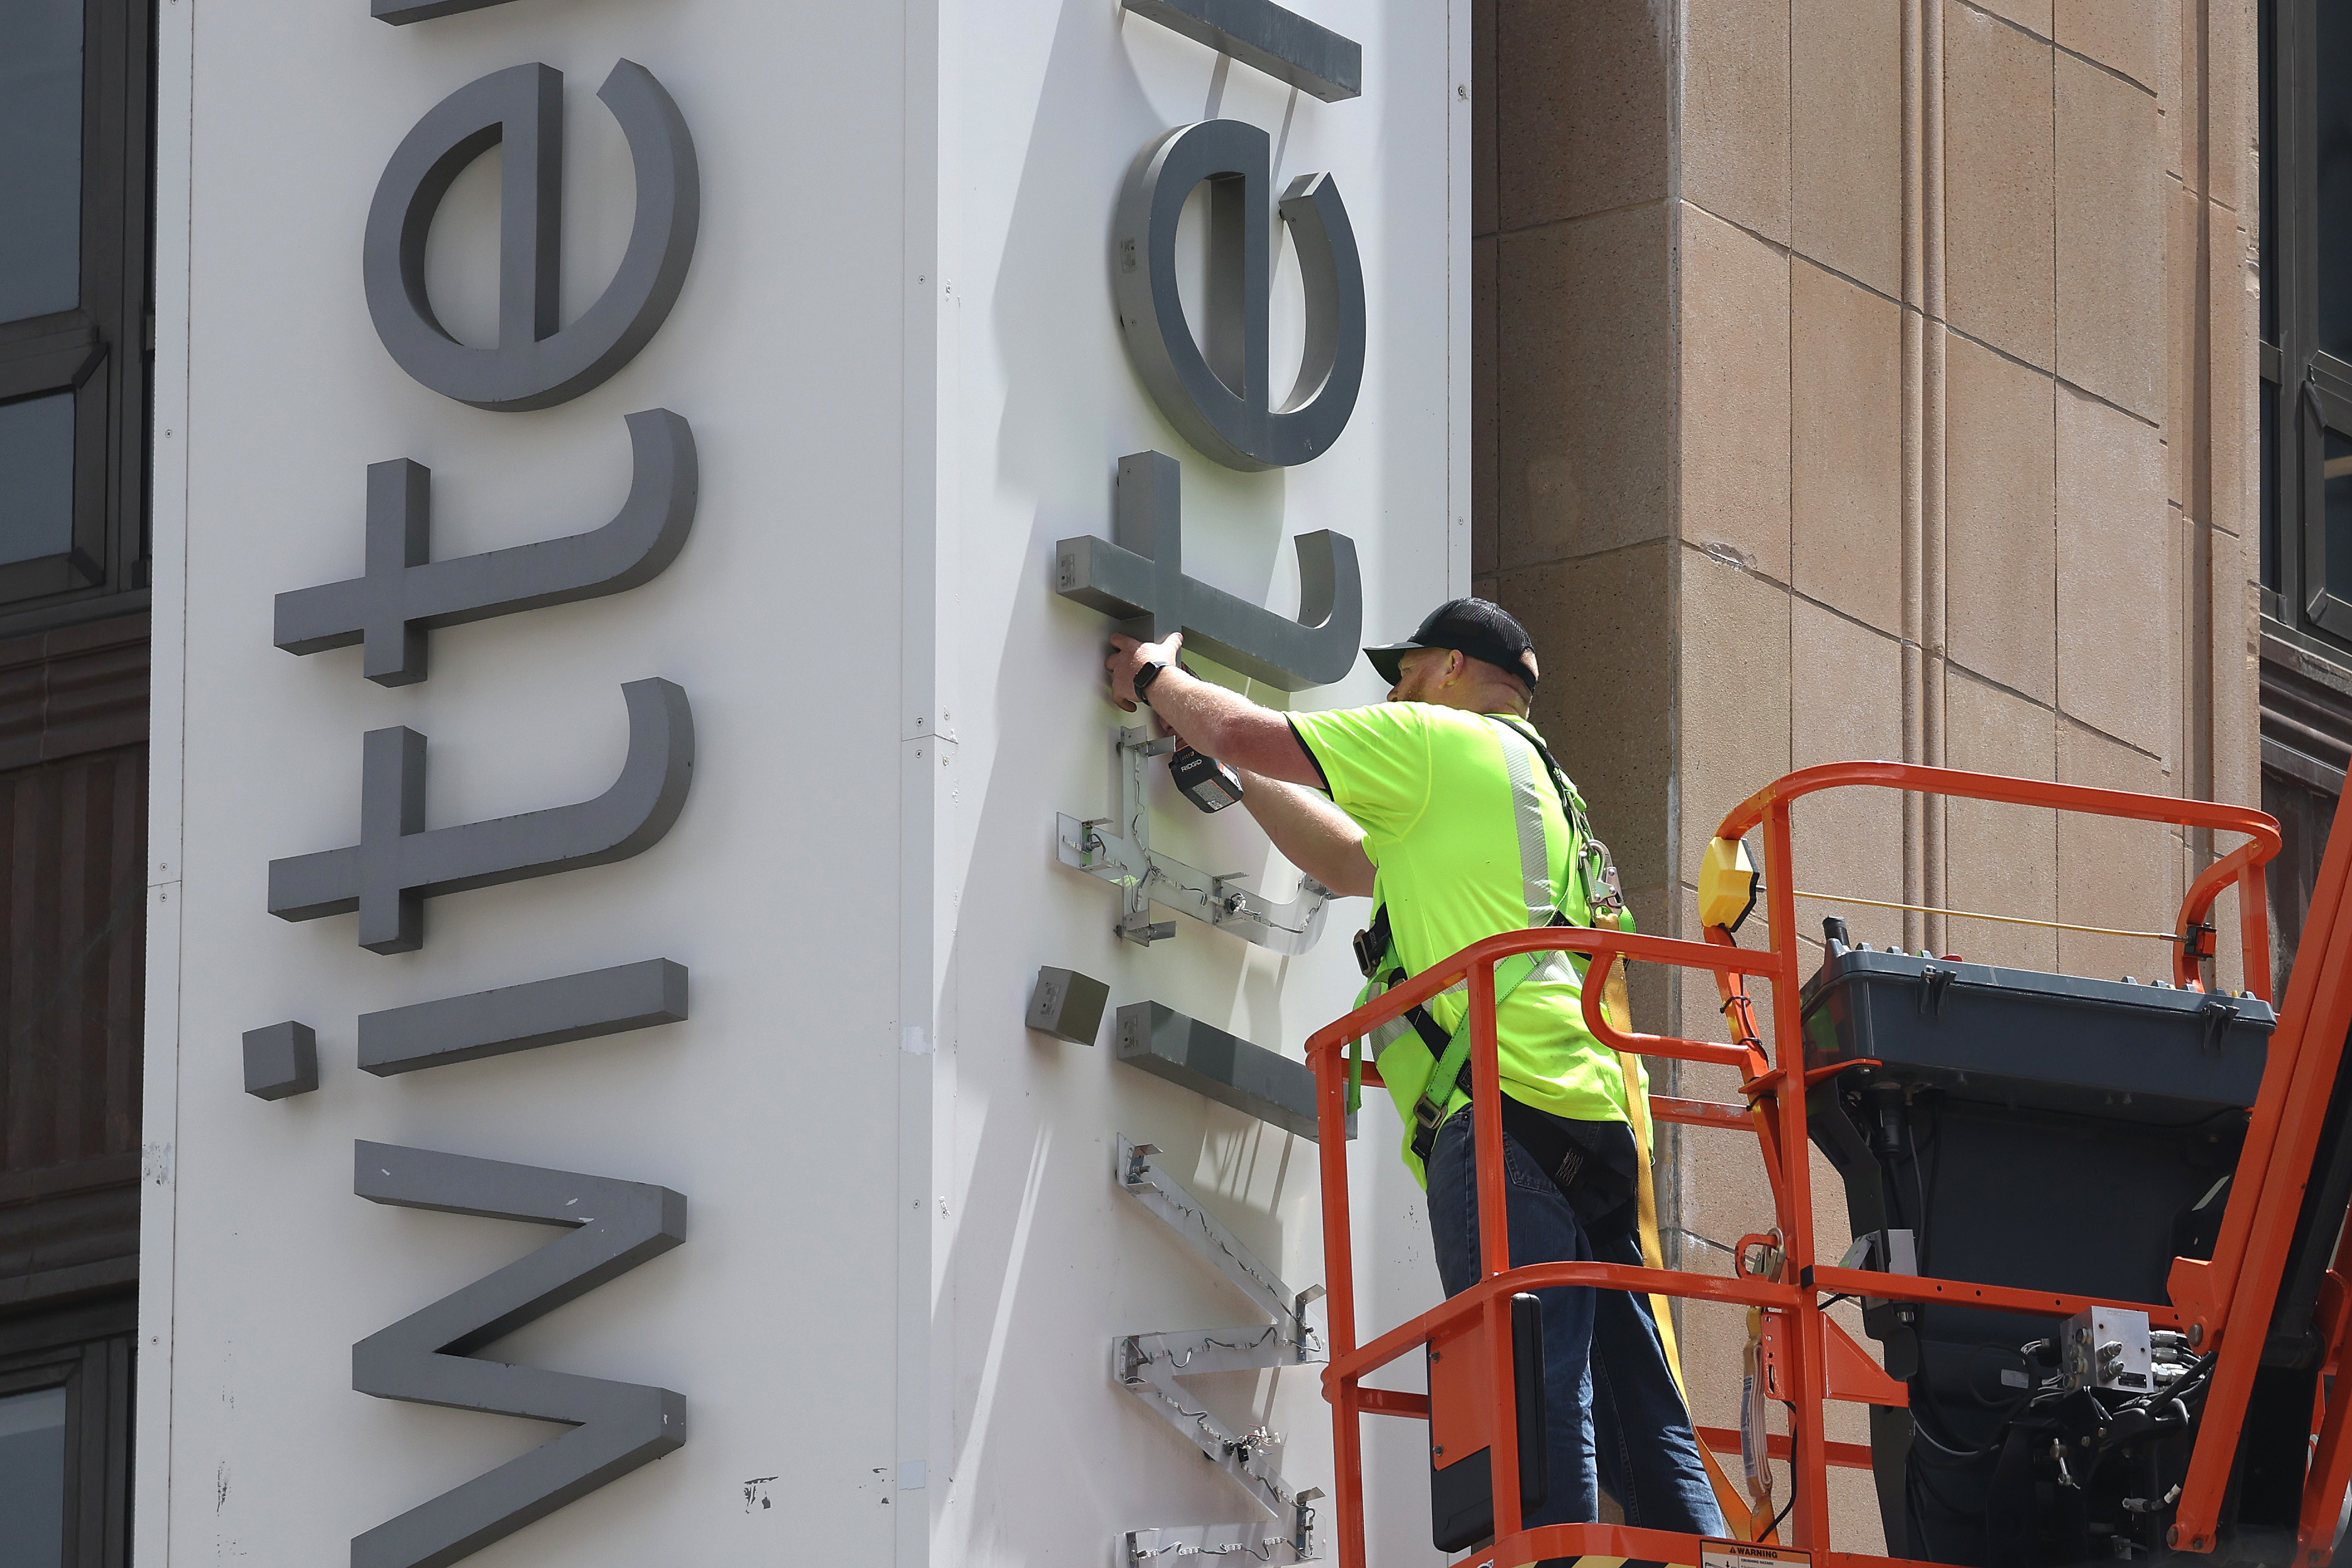 A worker taking down the twitter sign from the building